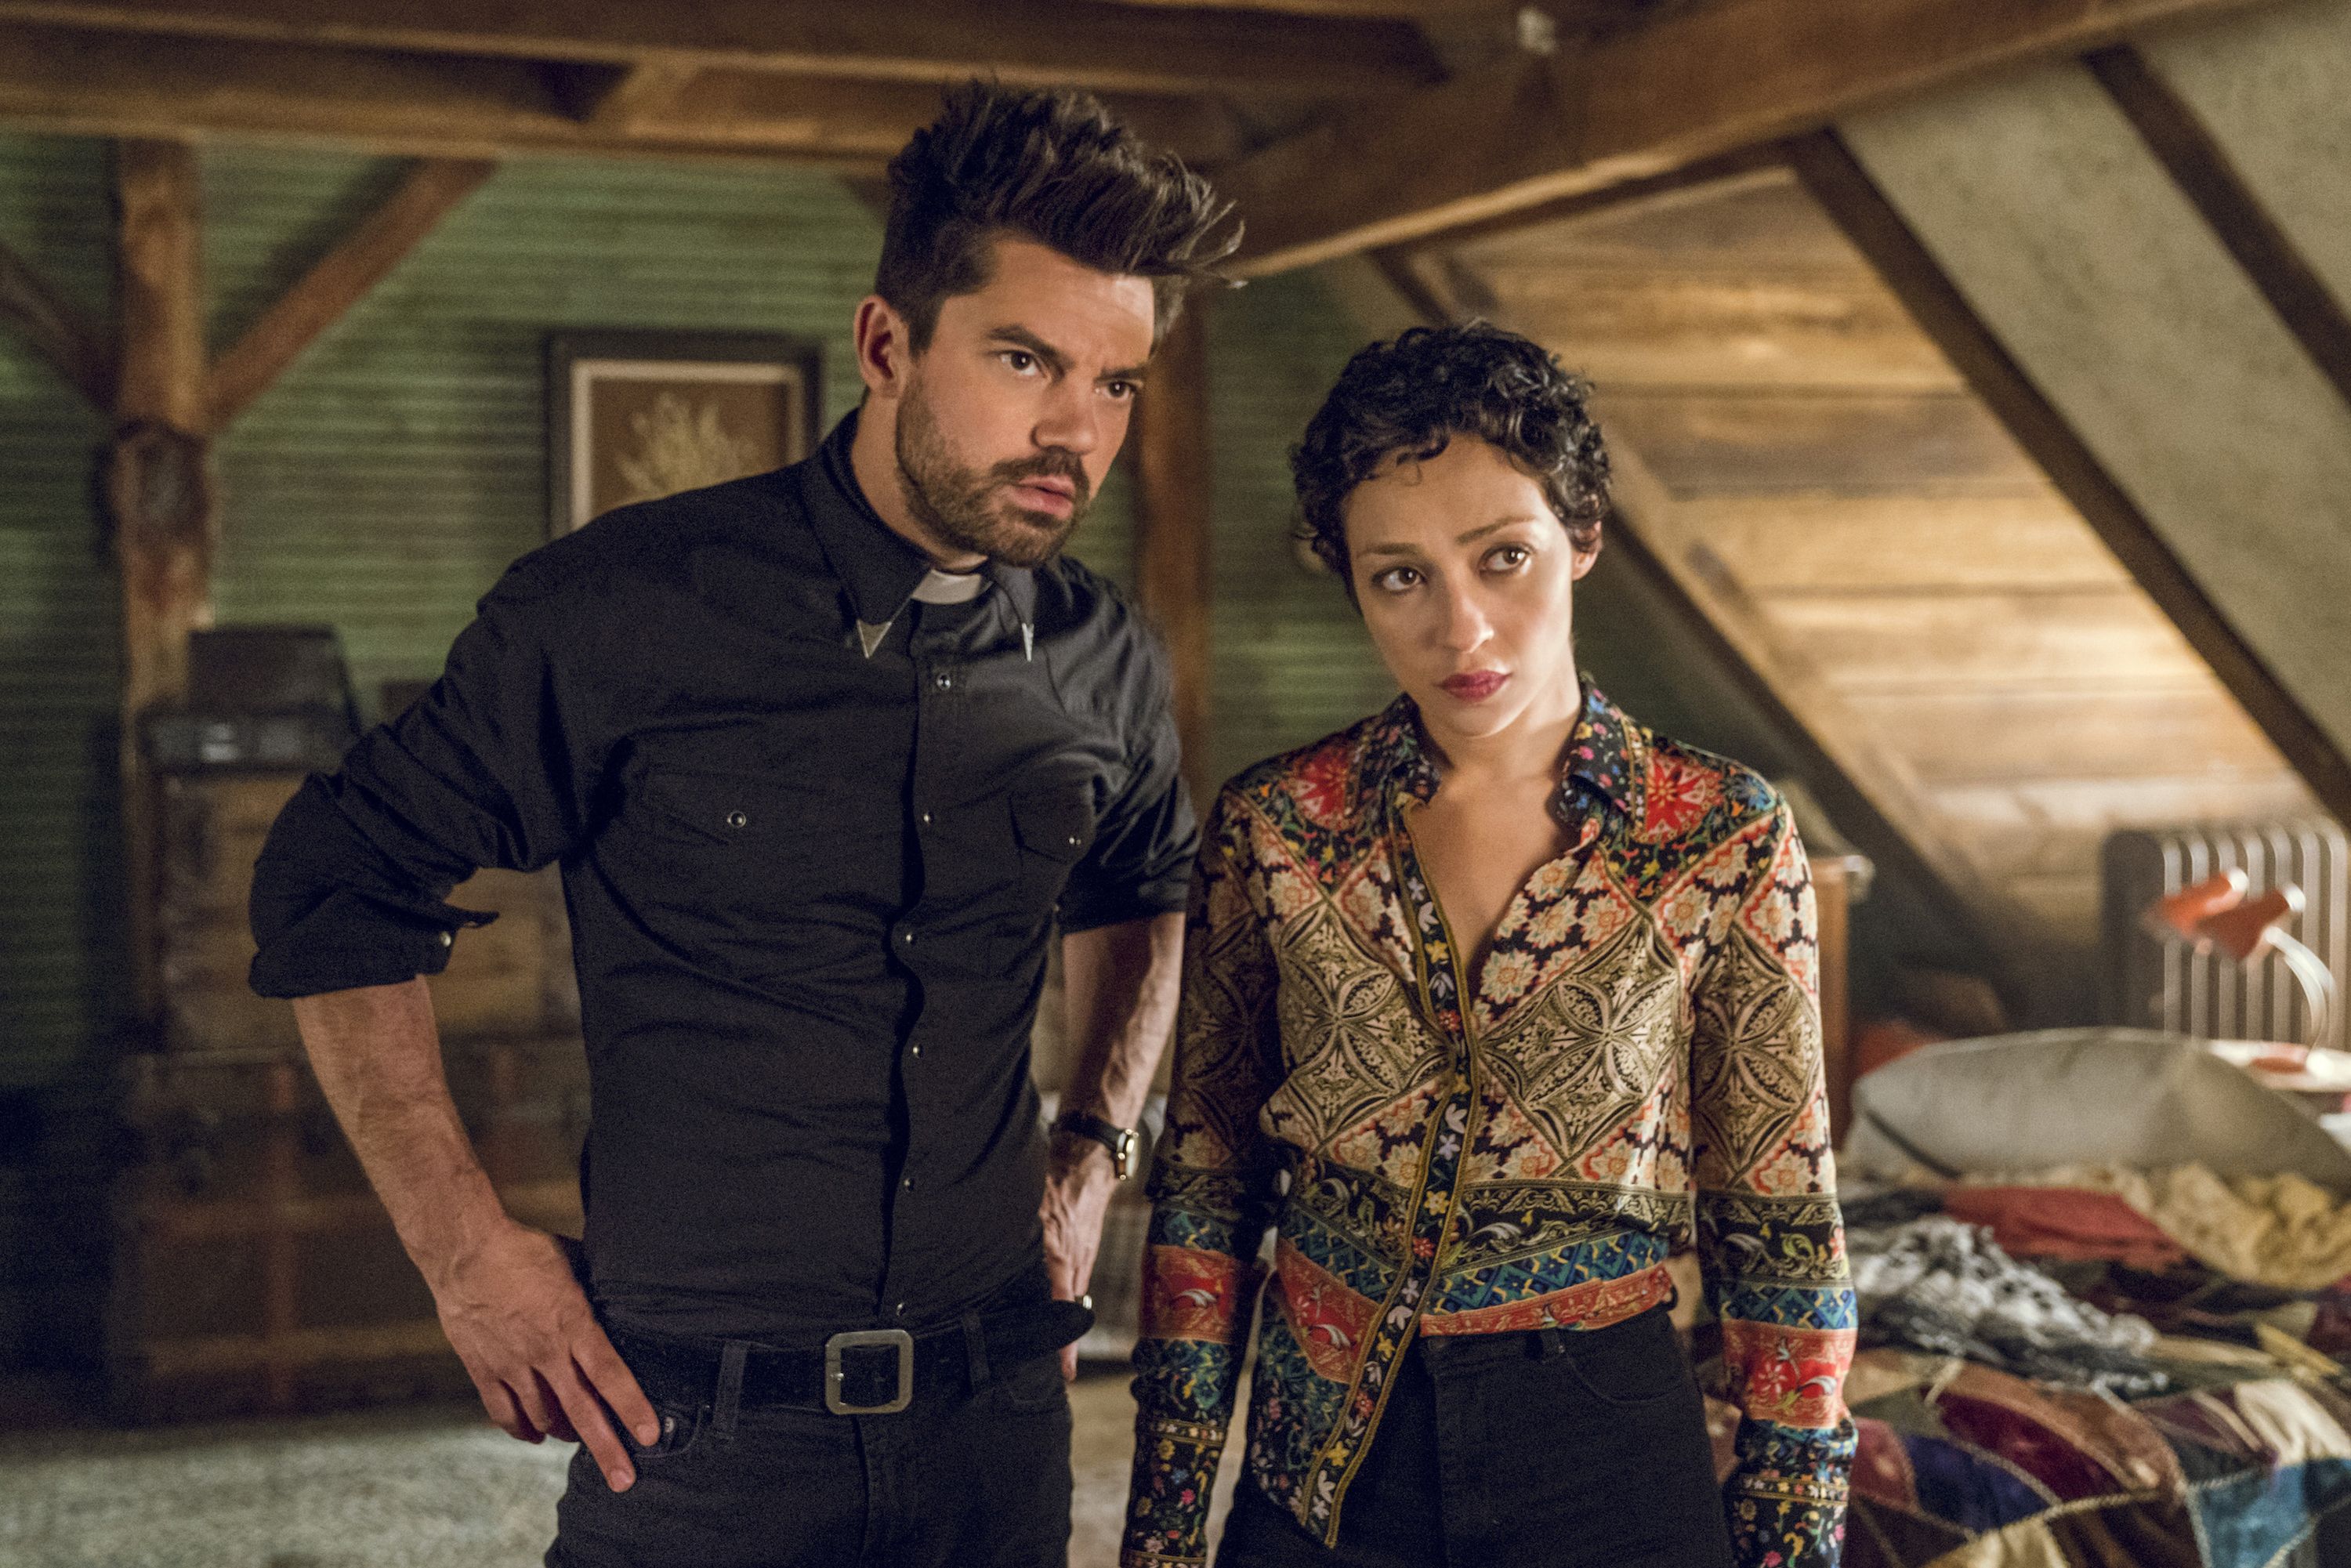 Preacher cast promise "no unfinished business" in season 4